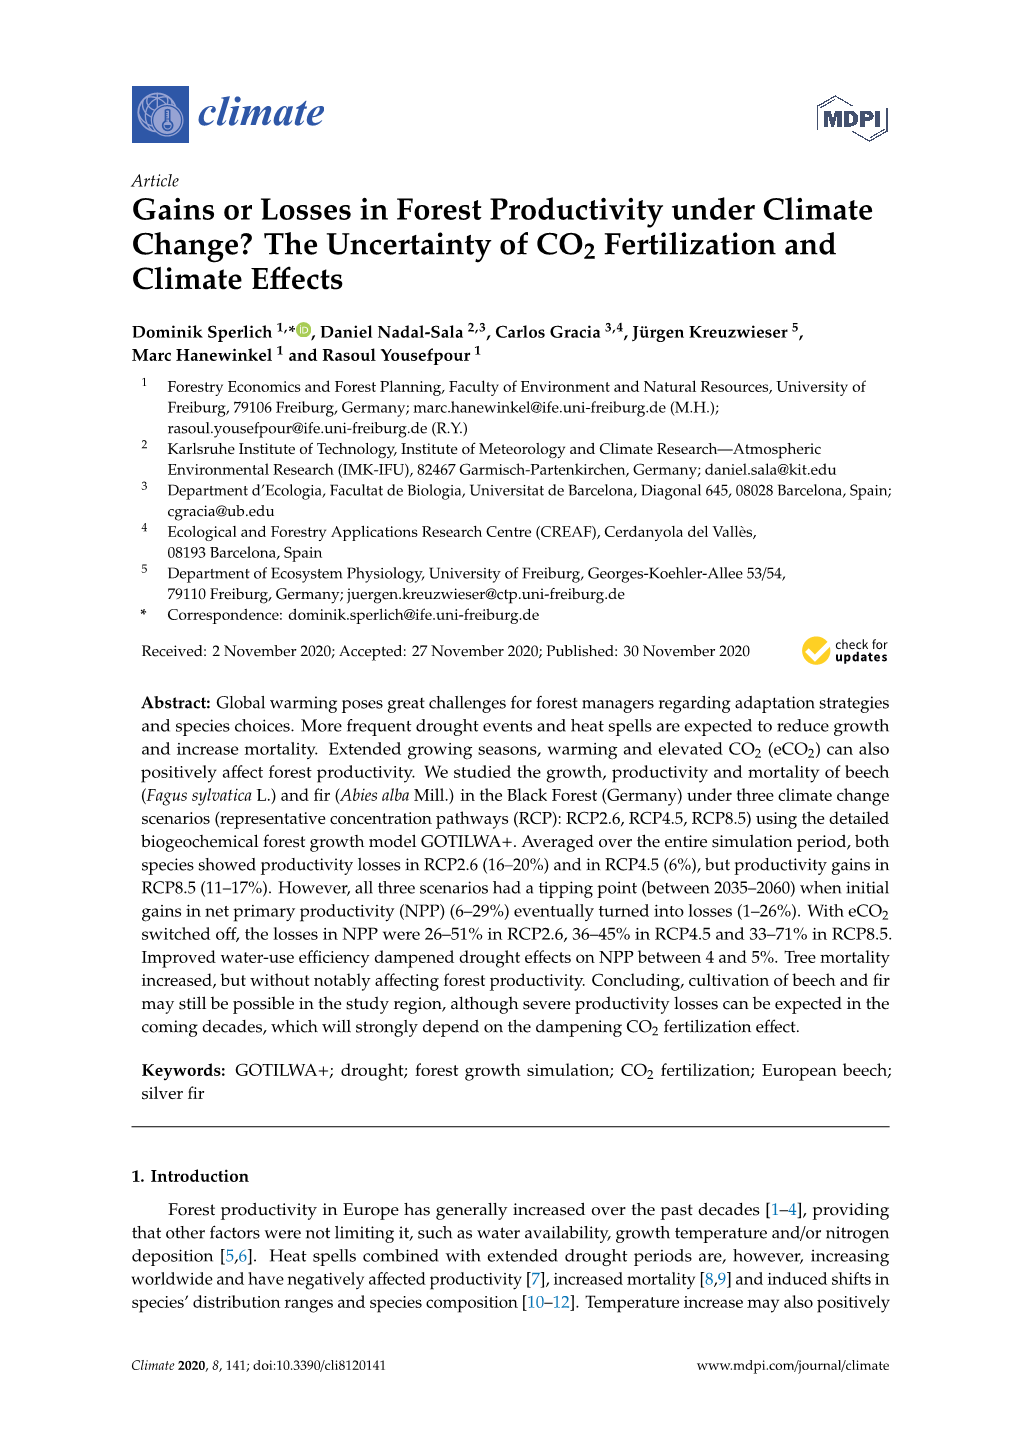 The Uncertainty of CO2 Fertilization and Climate Effects